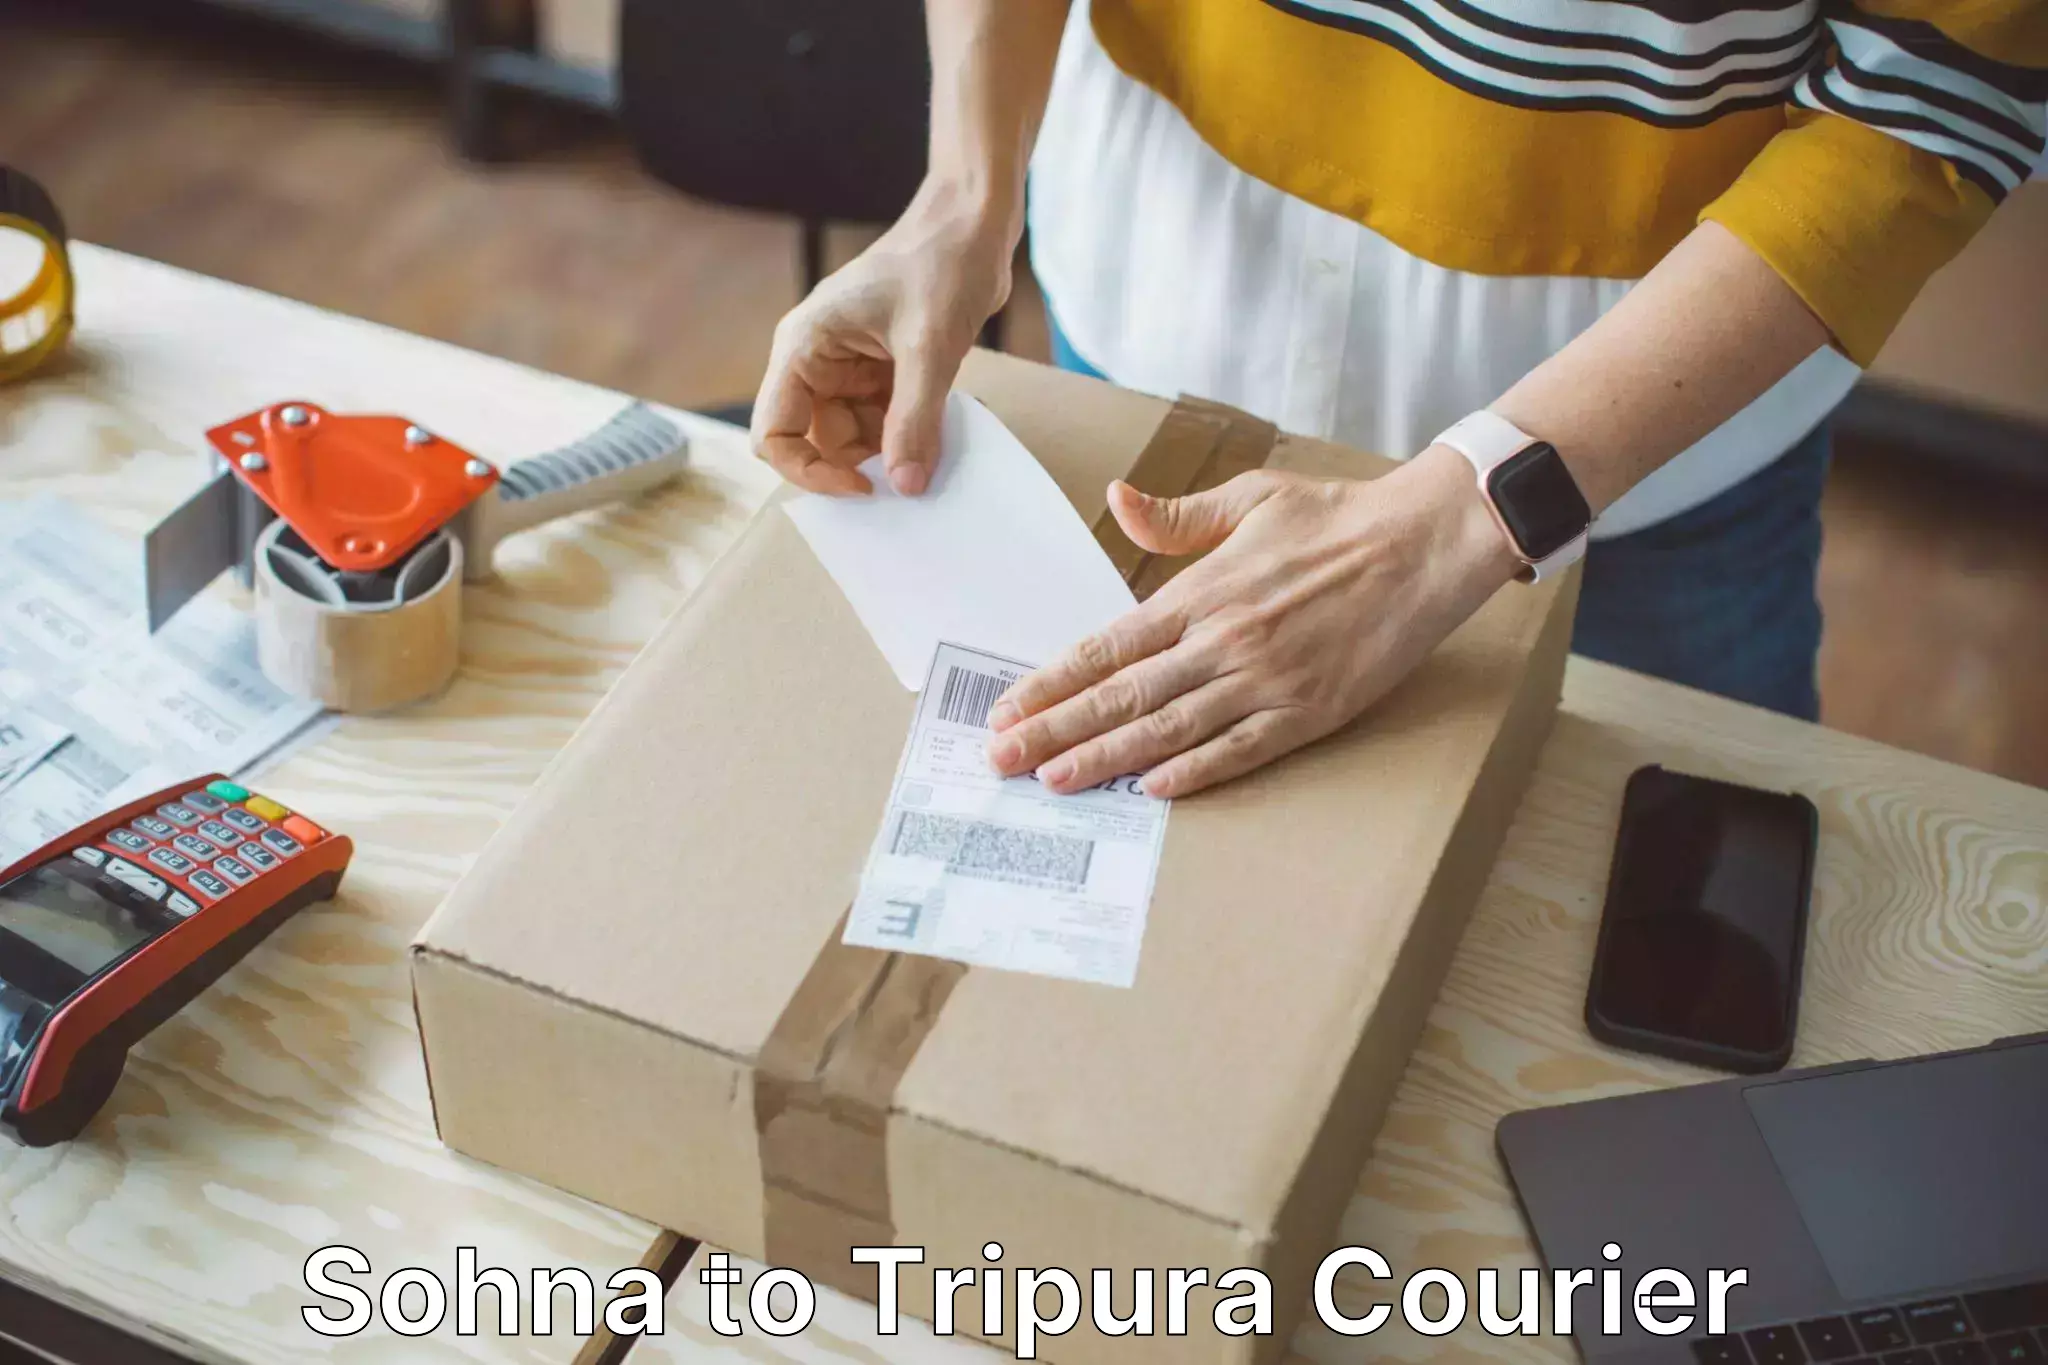 Luggage delivery app Sohna to Udaipur Tripura